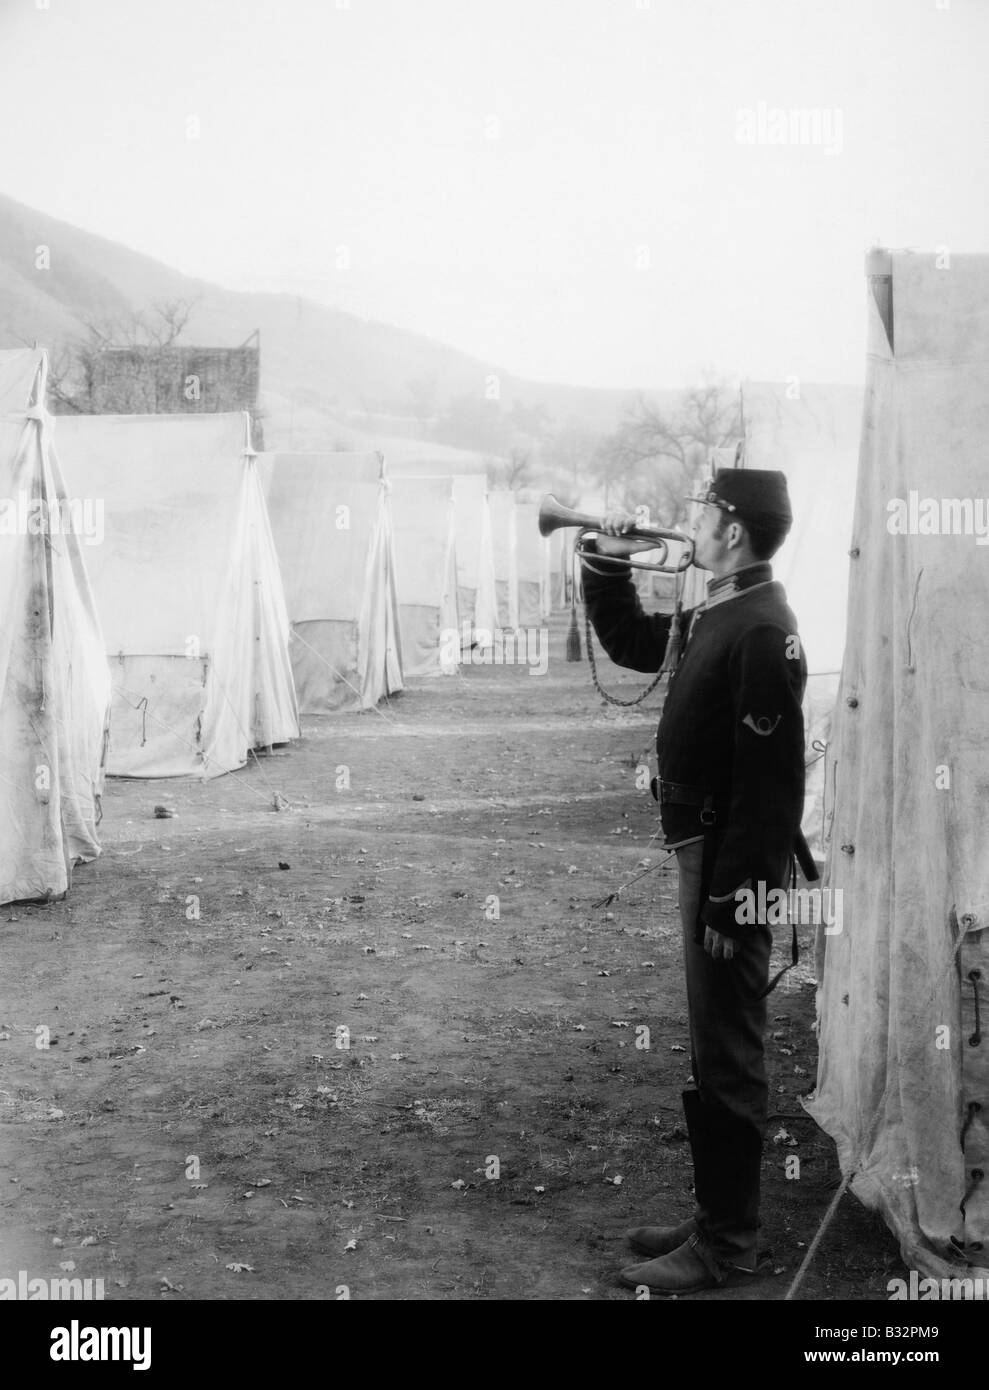 Soldier blowing bugle in army camp Stock Photo